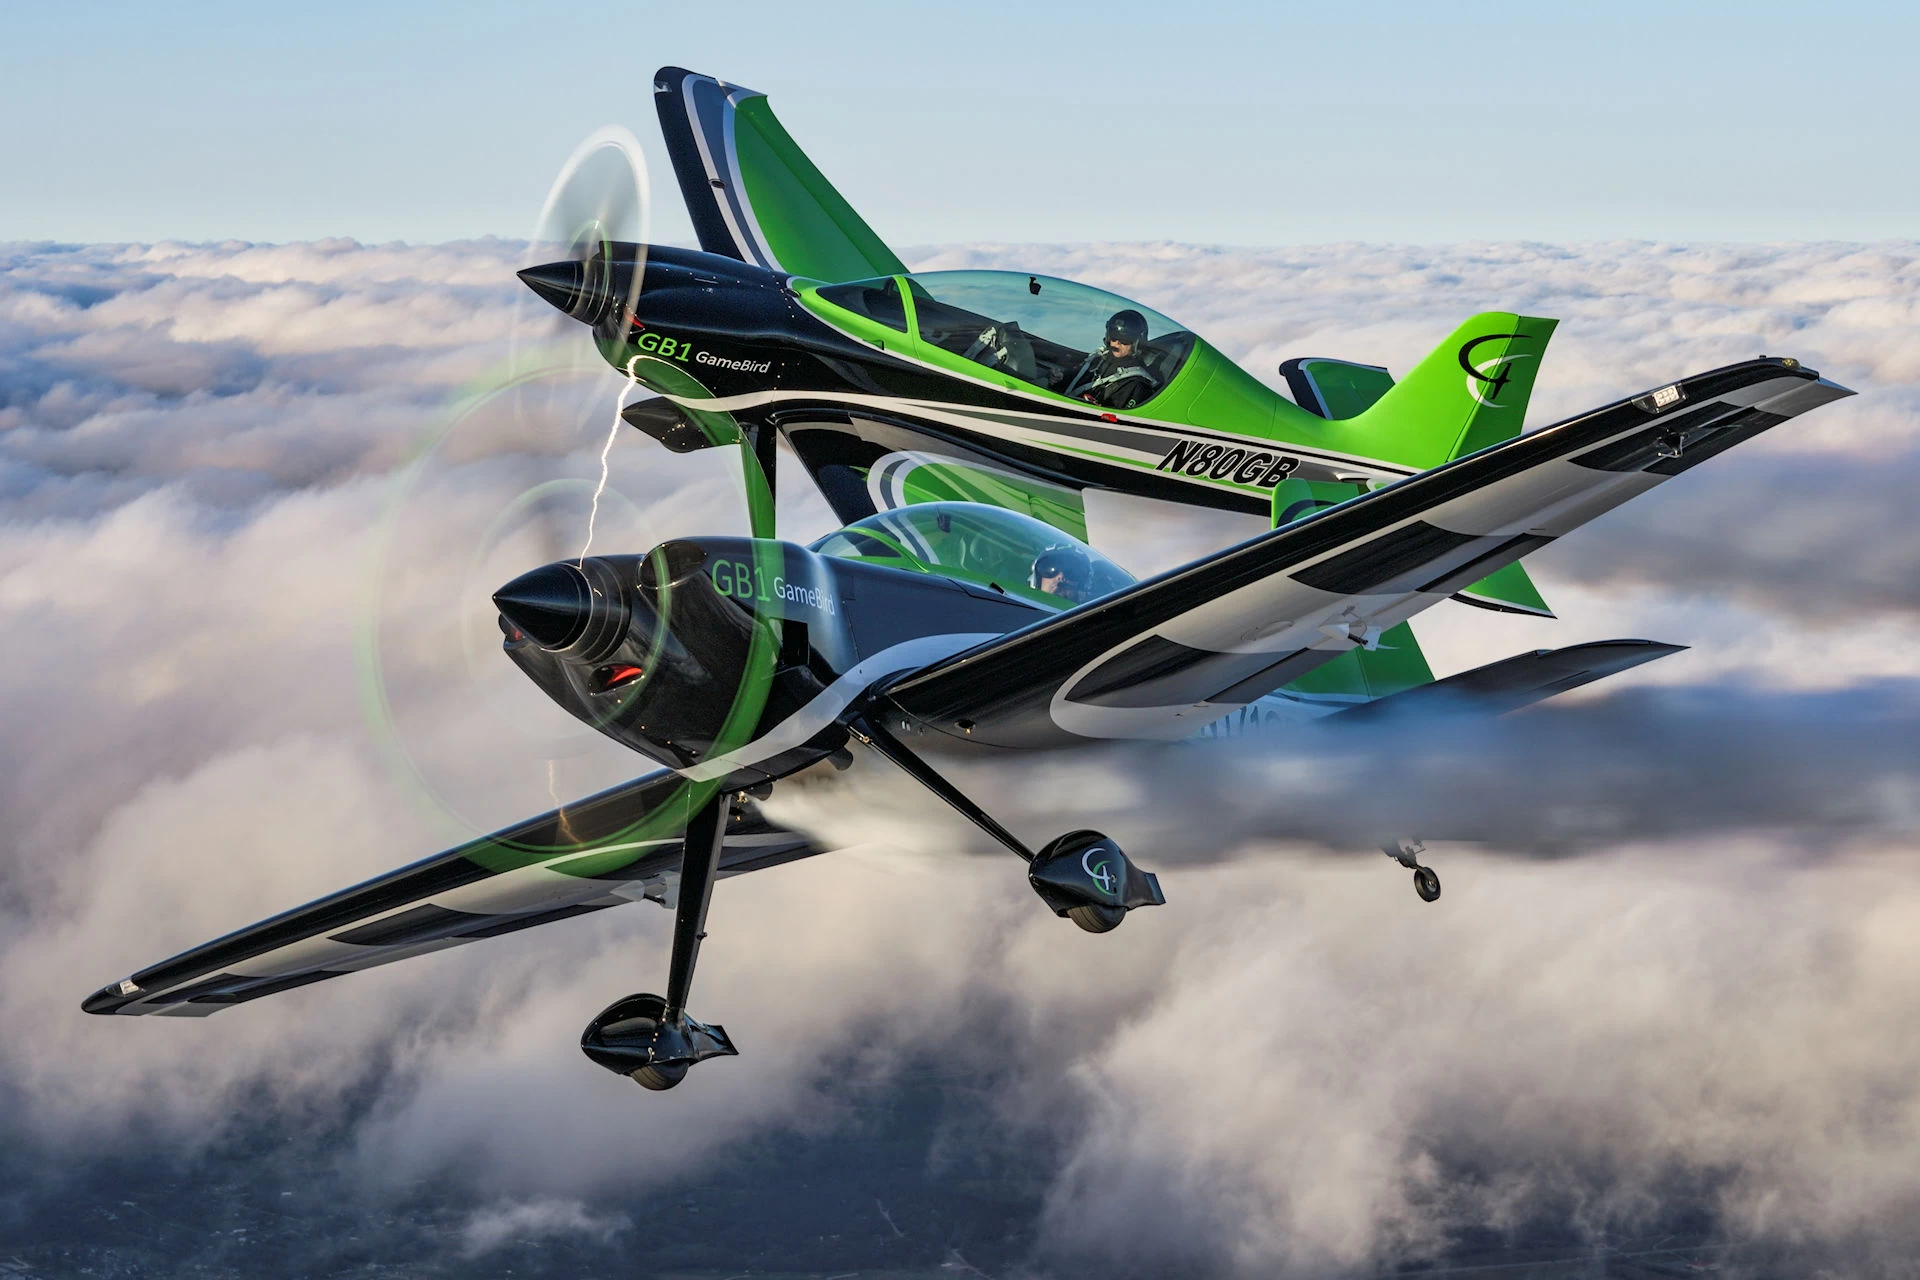 Premier Aircraft Sales Becomes Game Composites' First Authorized Dealer